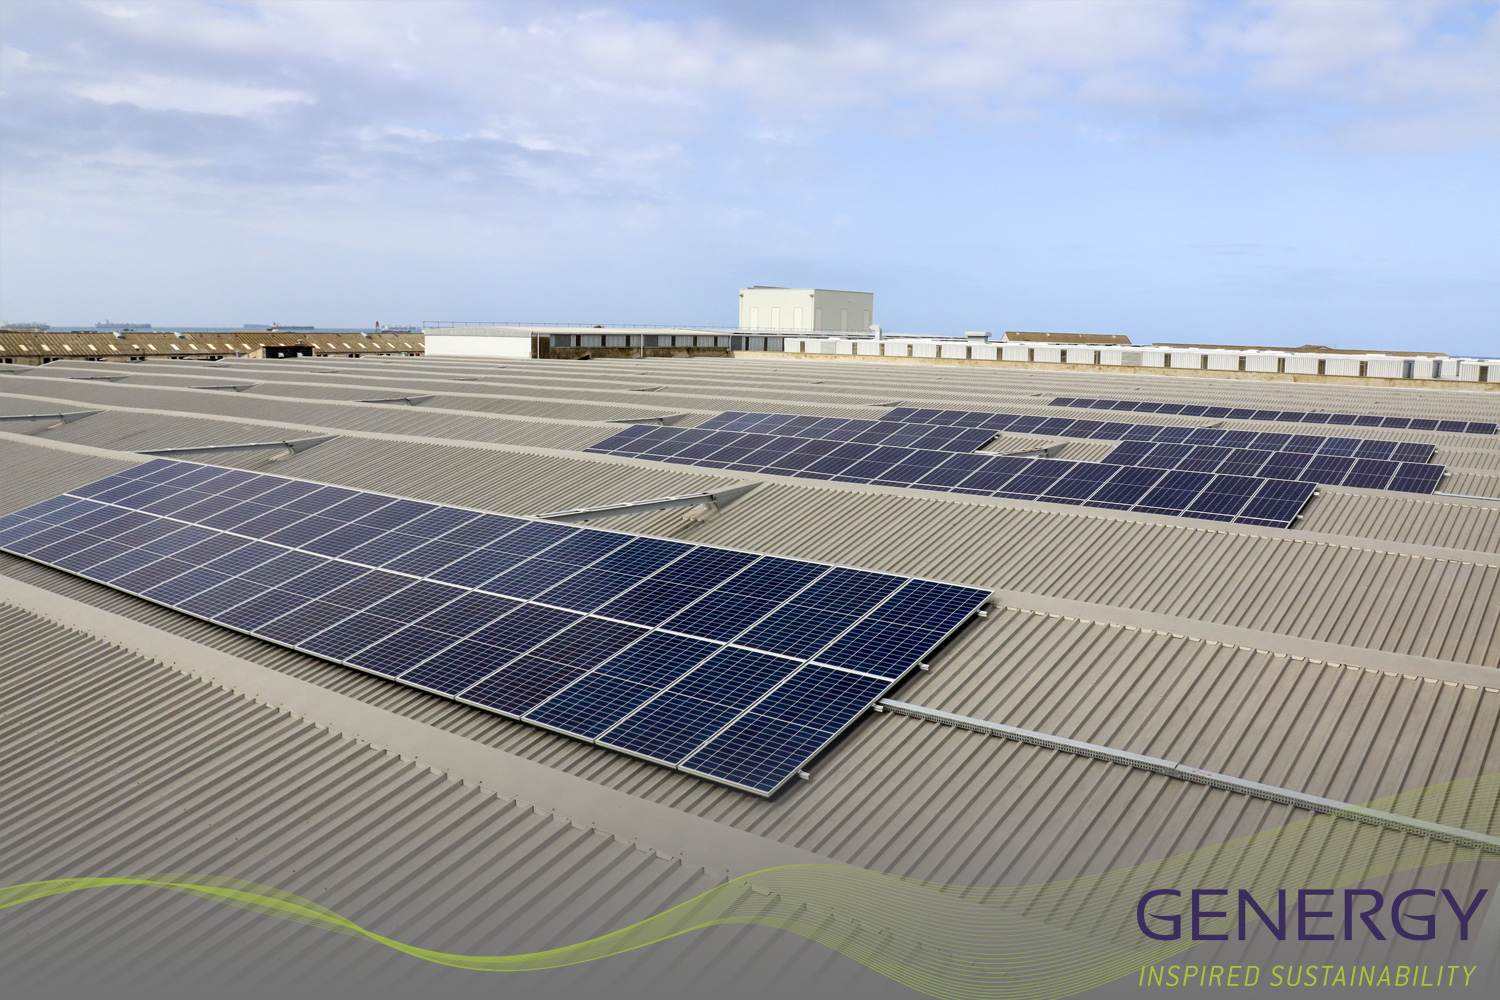 Solar Panels on rooftop with writing: GENERGY, Inspired Sustainability